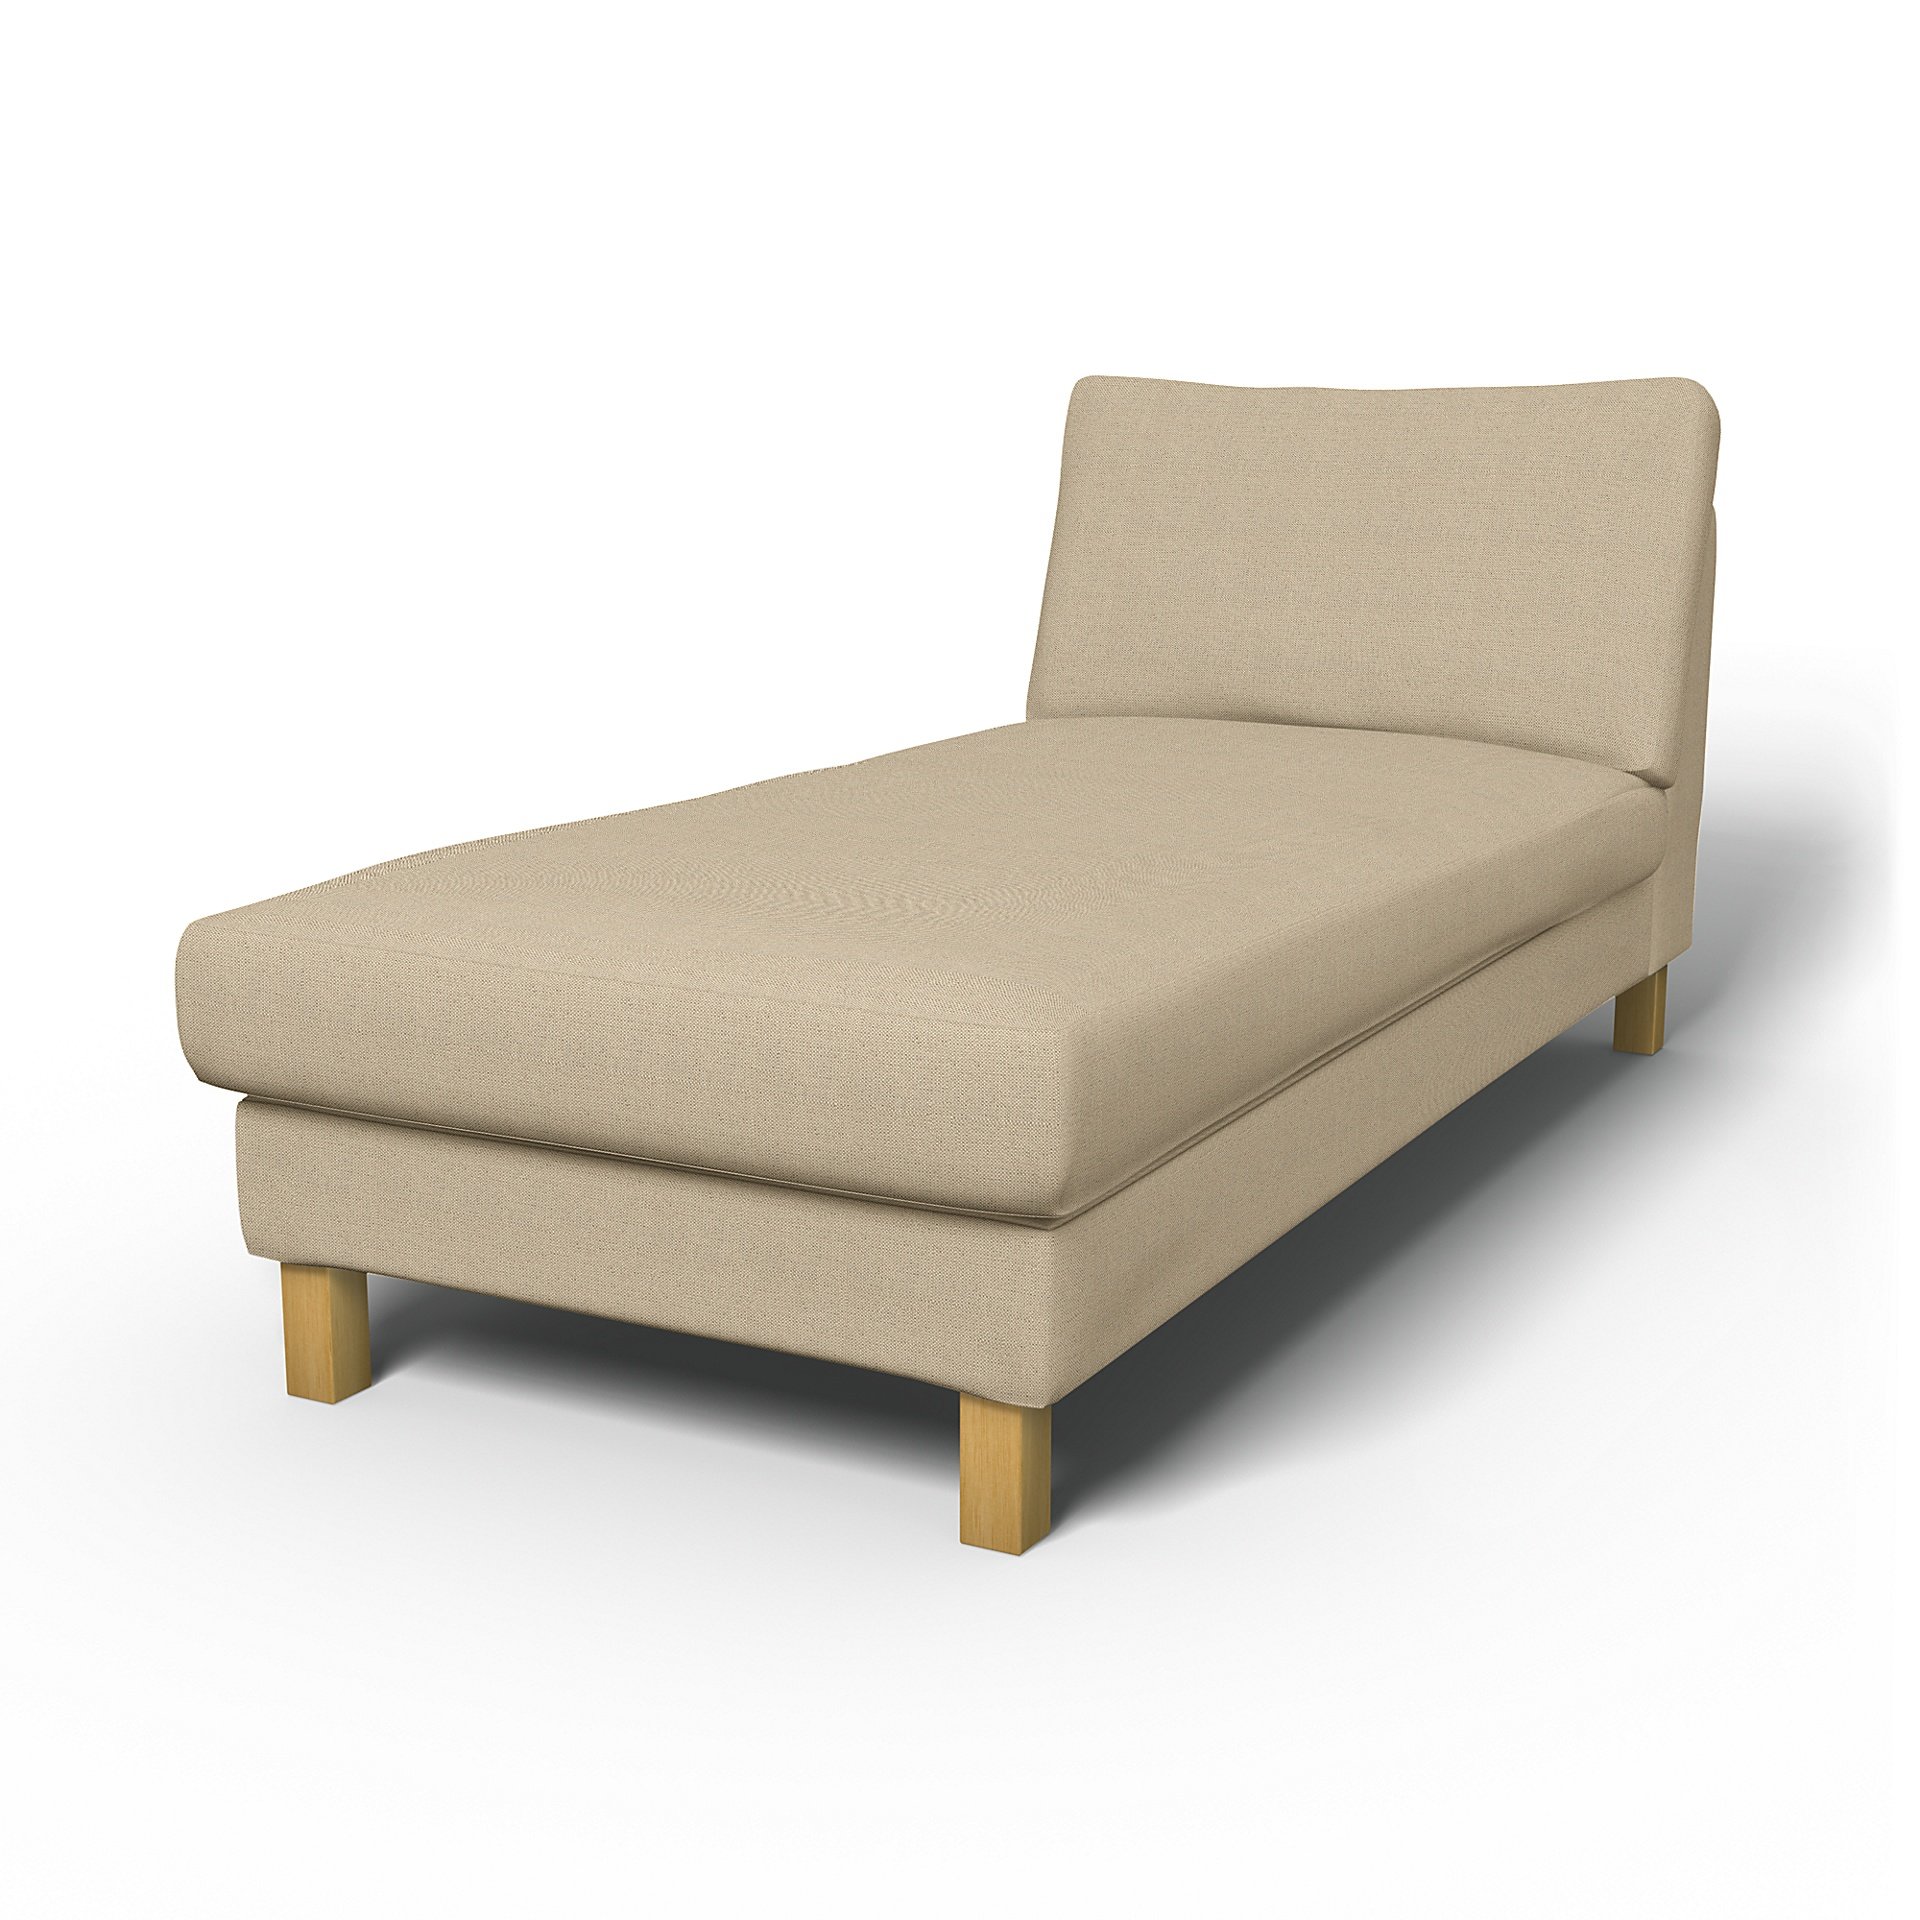 IKEA - Karlstad Stand Alone Chaise Longue Cover, Unbleached, Linen - Bemz